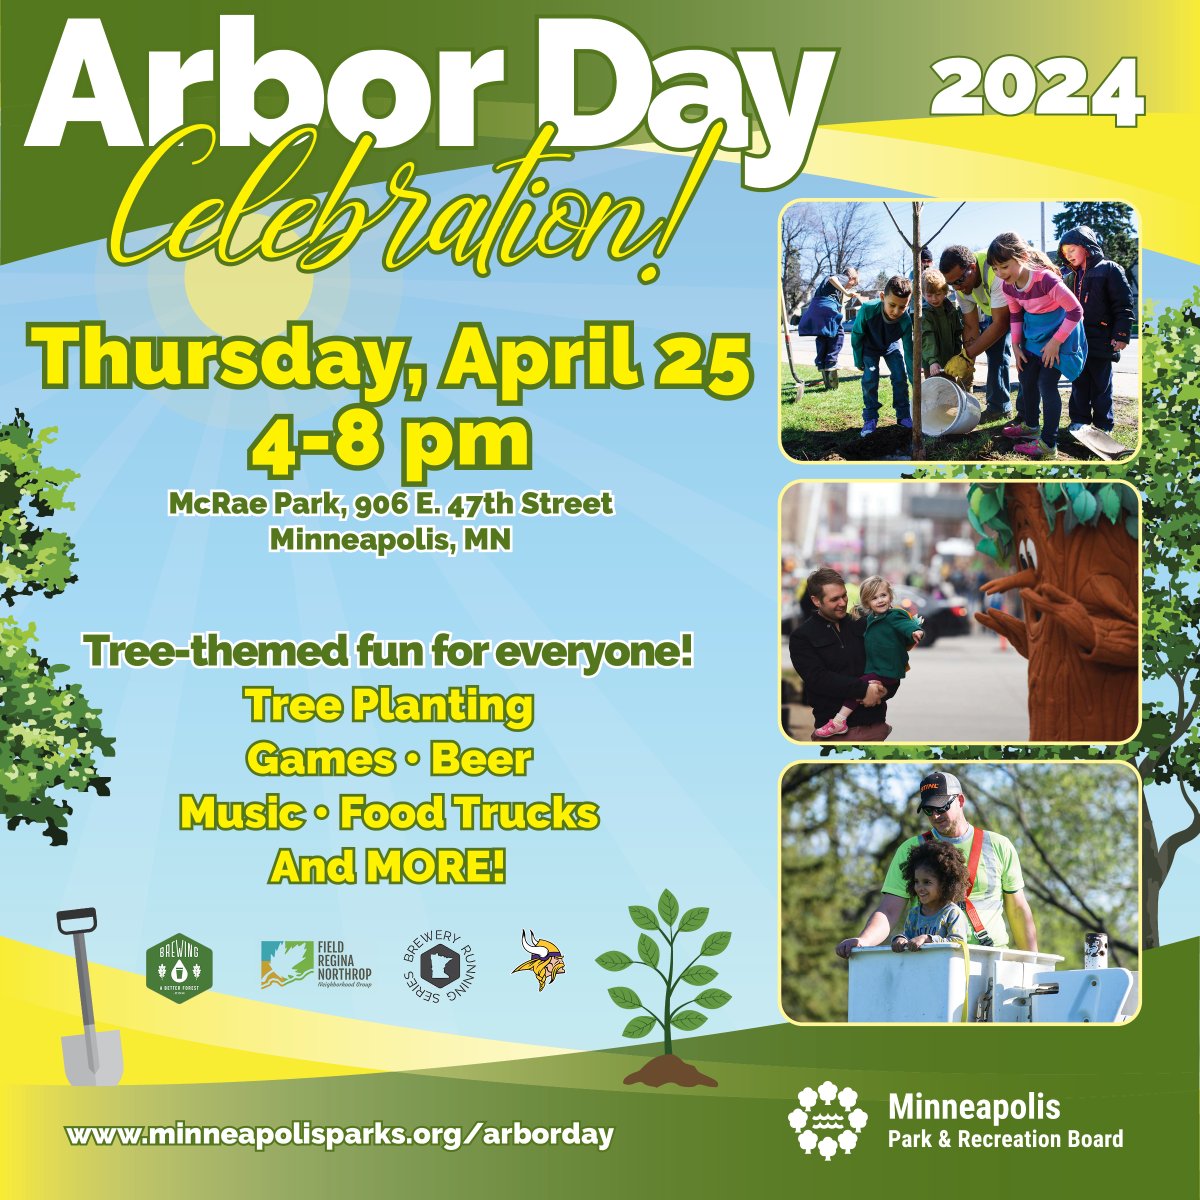 Due to forecasted inclement weather, the 2024 Arbor Day Celebration has been moved to Thursday, April 25.